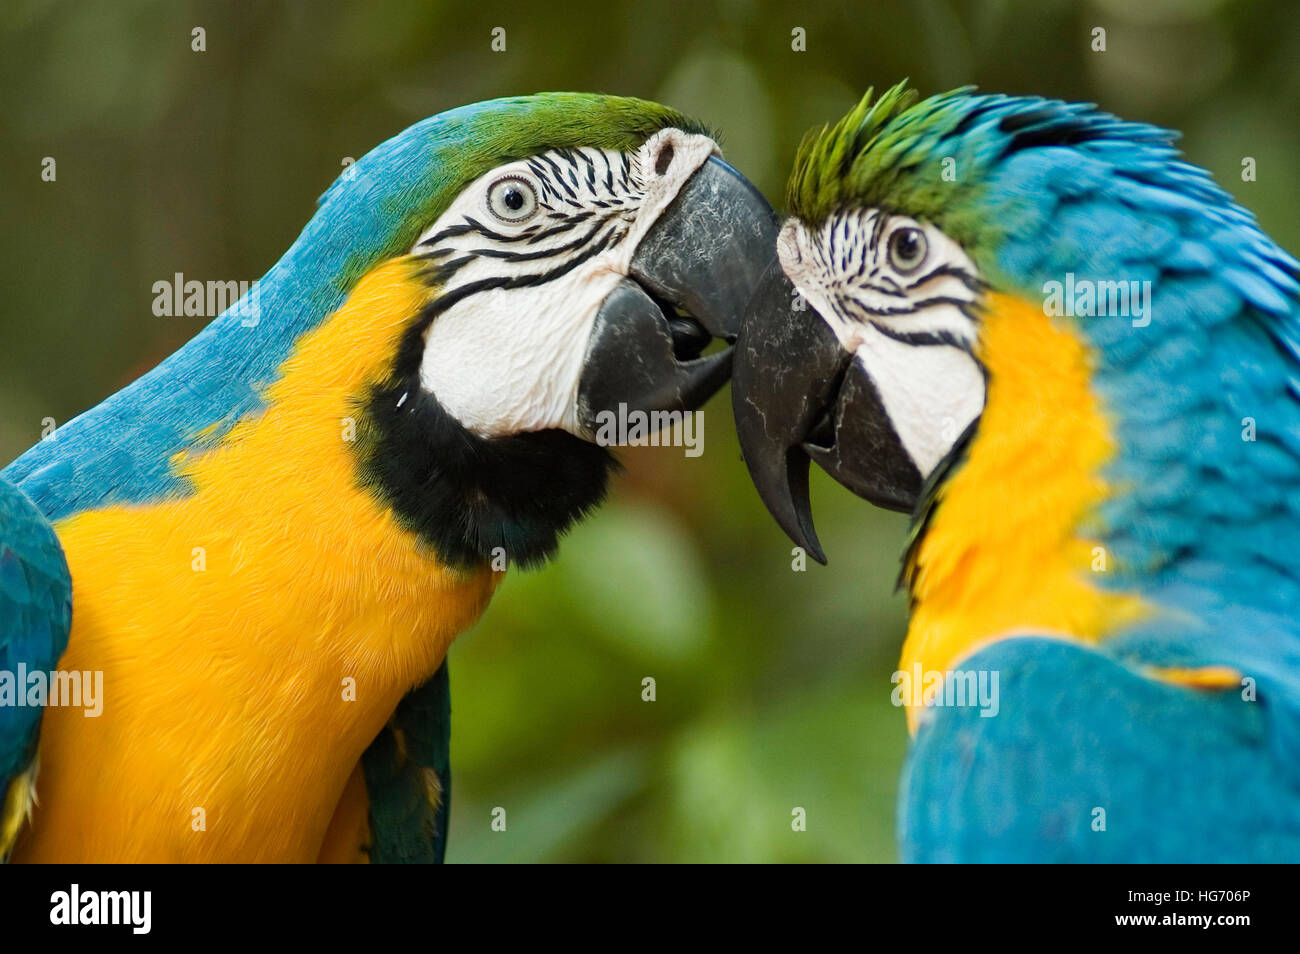 Closeup of Two blue and yellow male and female Macaws parrots kissing Stock Photo